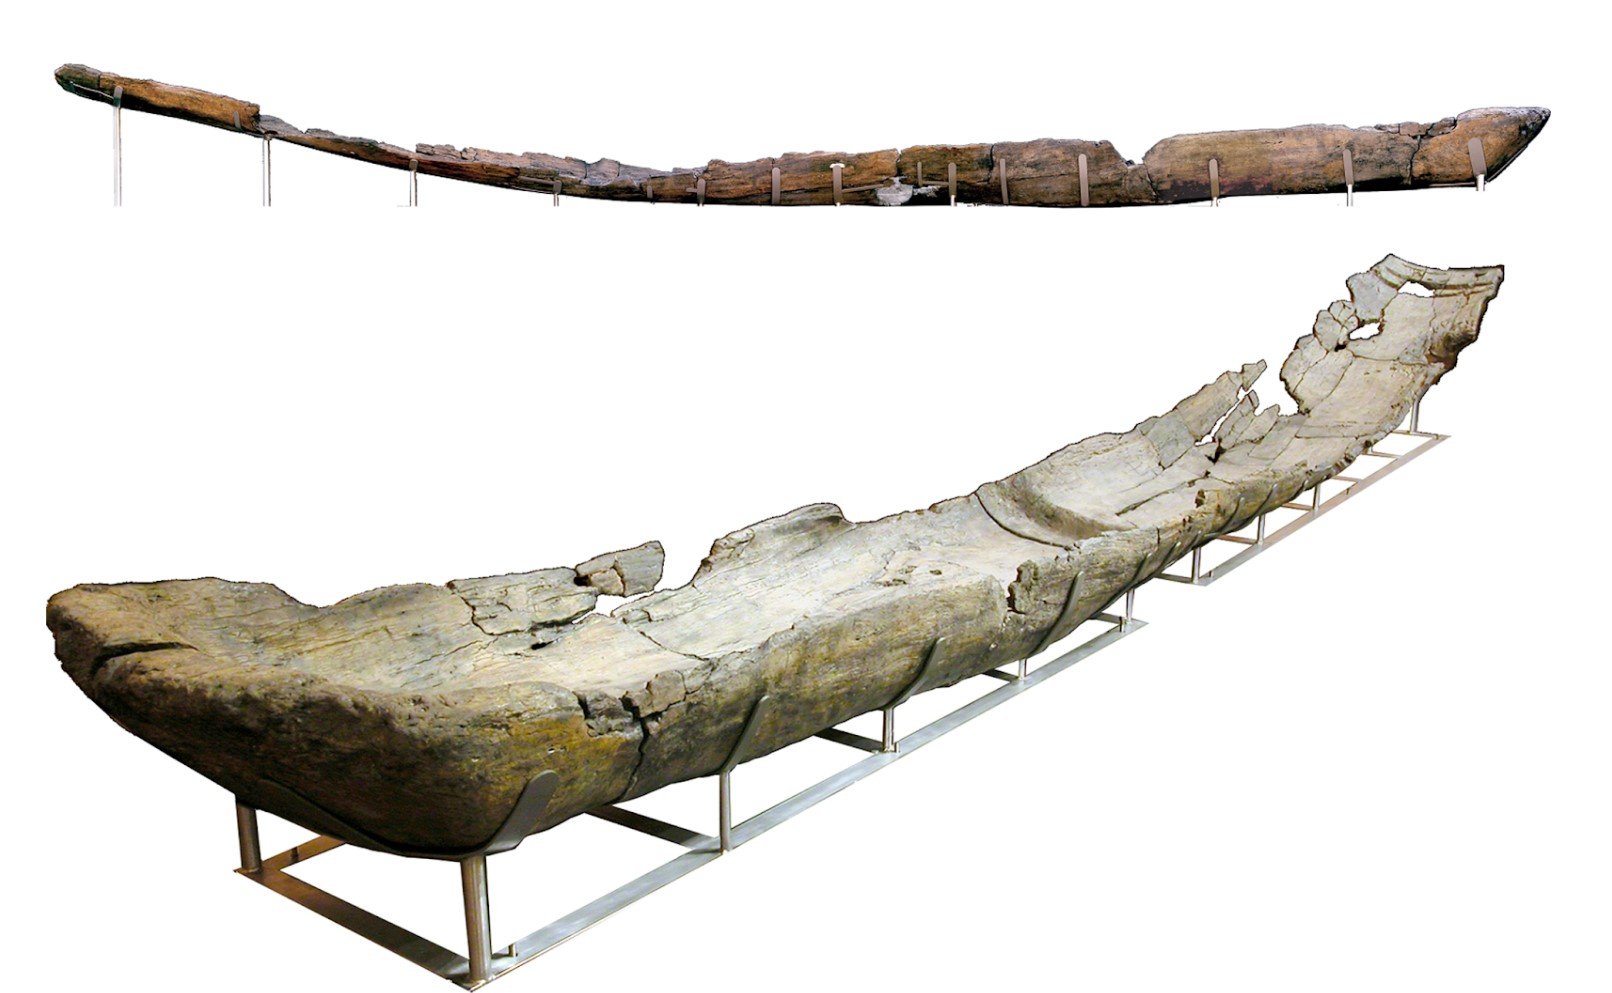 An image of one of the canoes discovered at the Italian site of La Marmotta